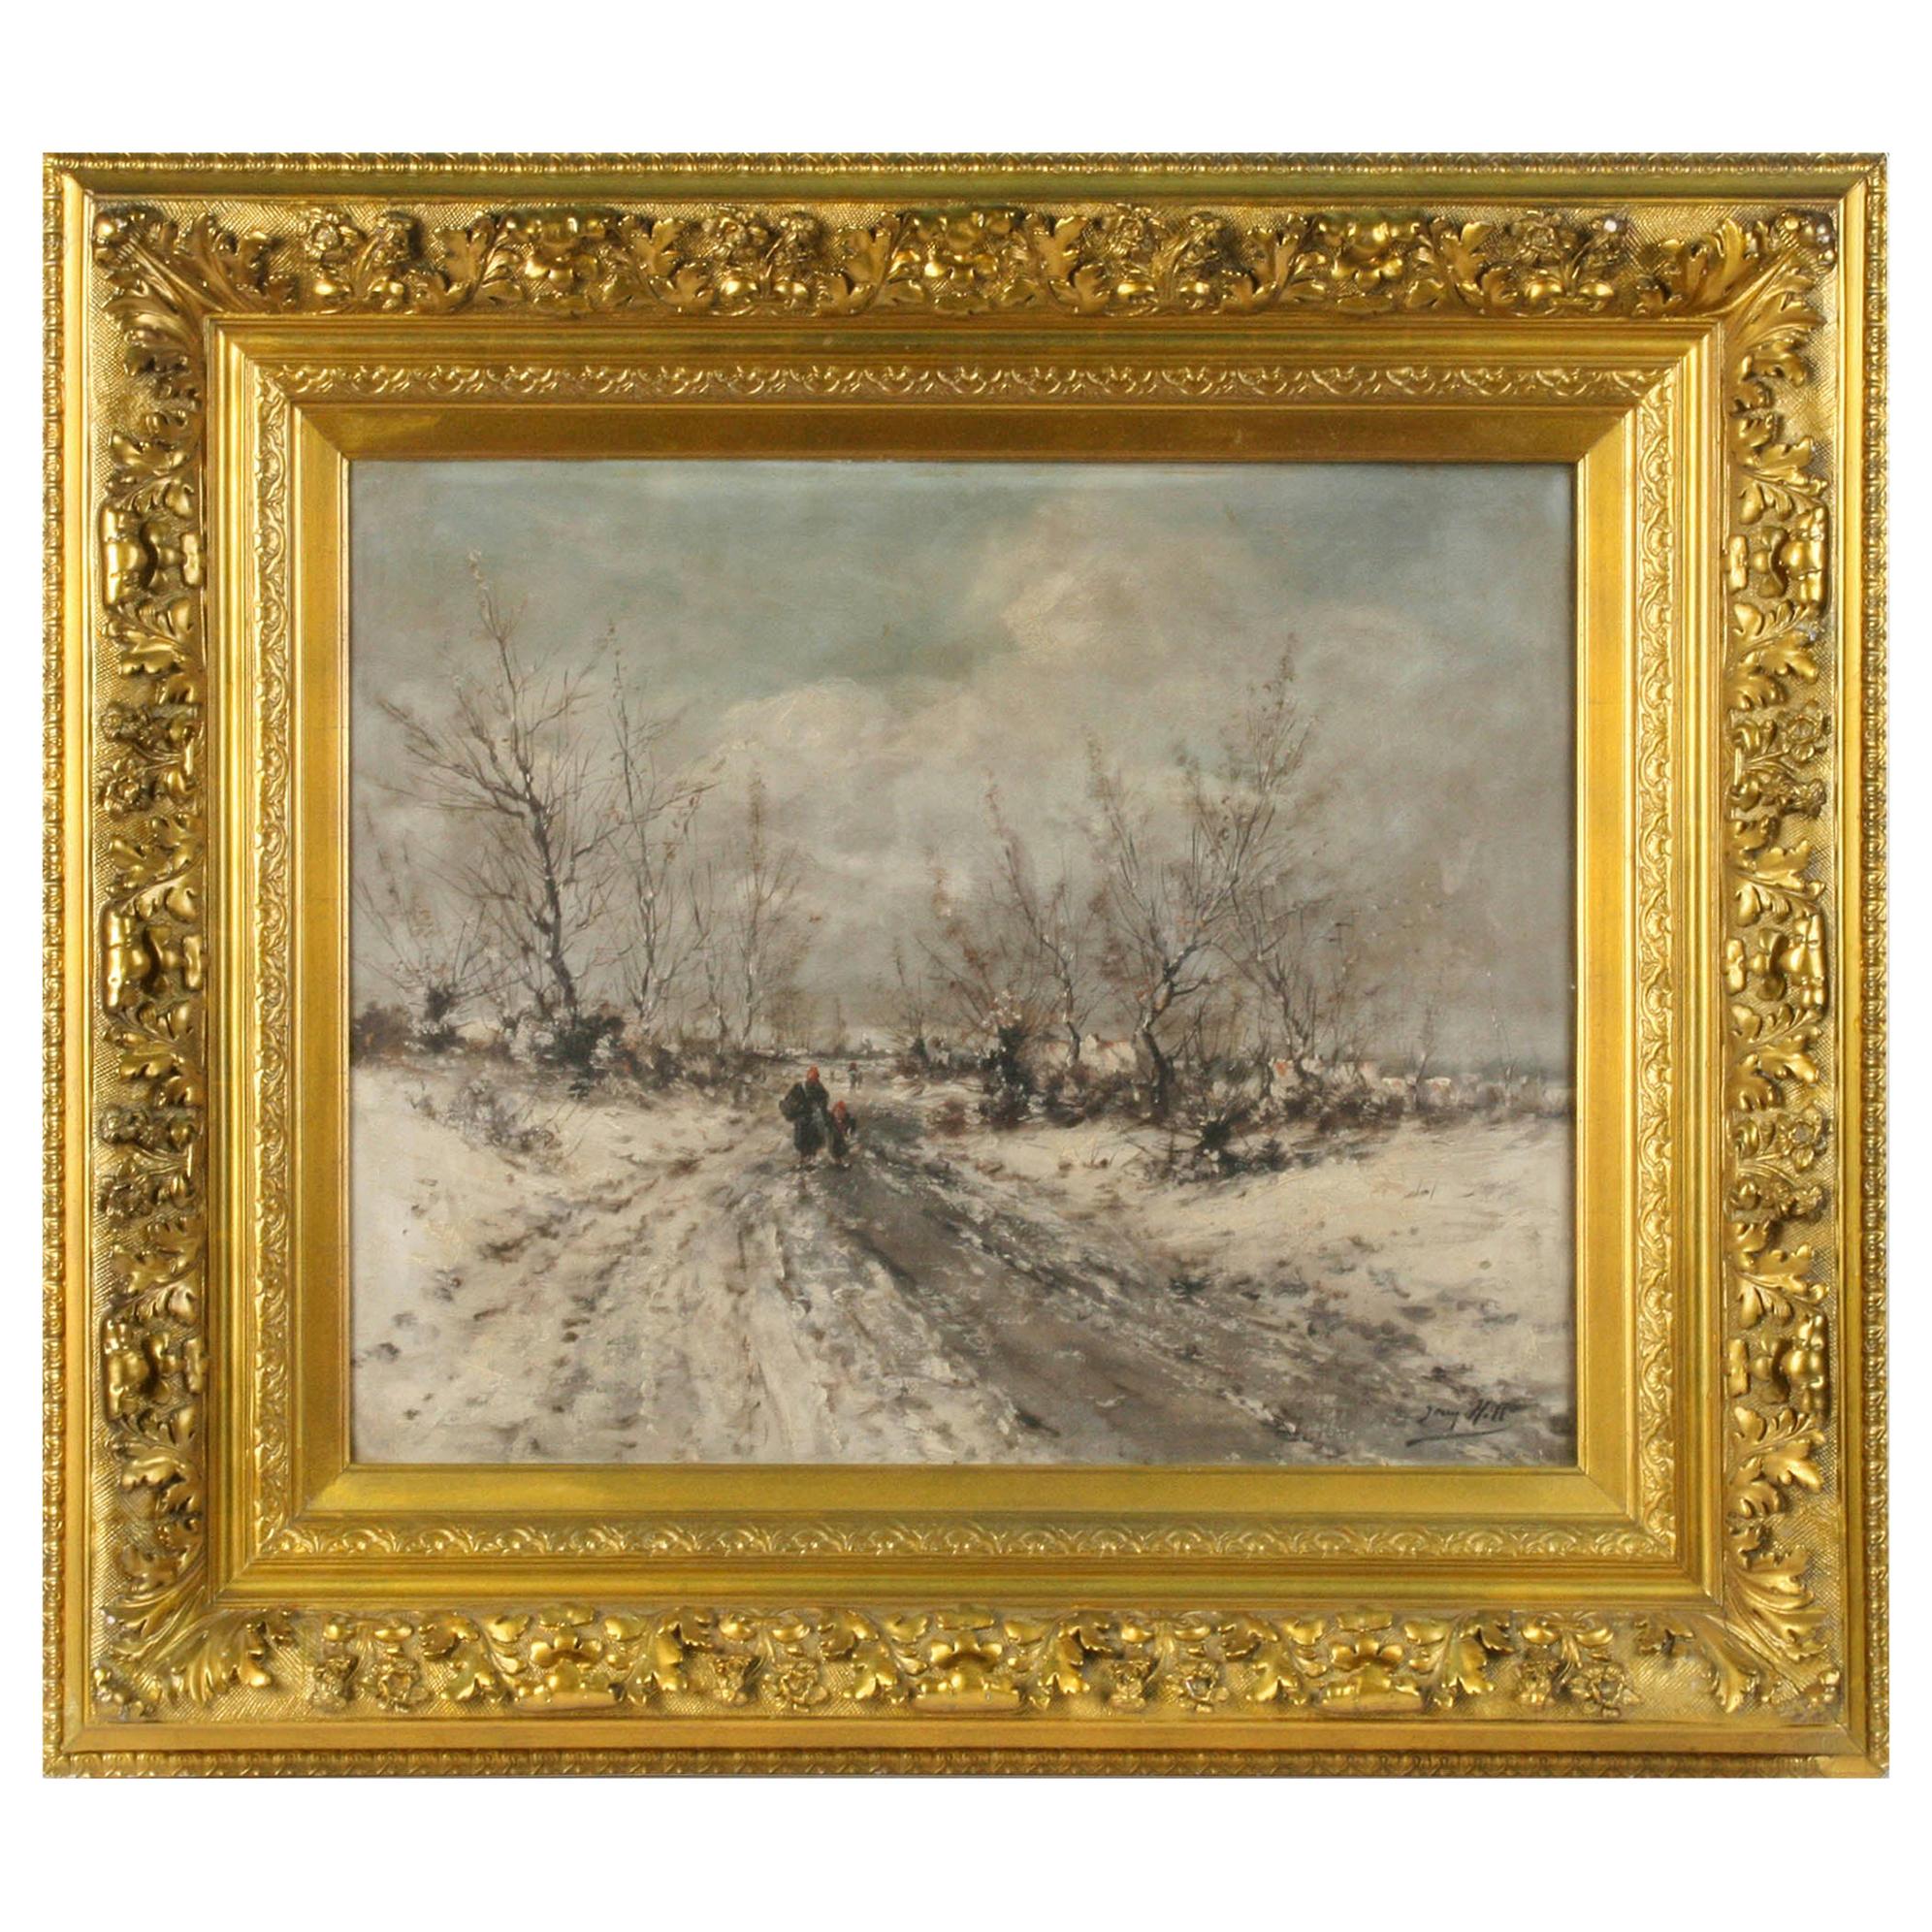 Oil Painting on Canvas, Winterlandscape by Jean Hill, Belgium, Late 19th Century